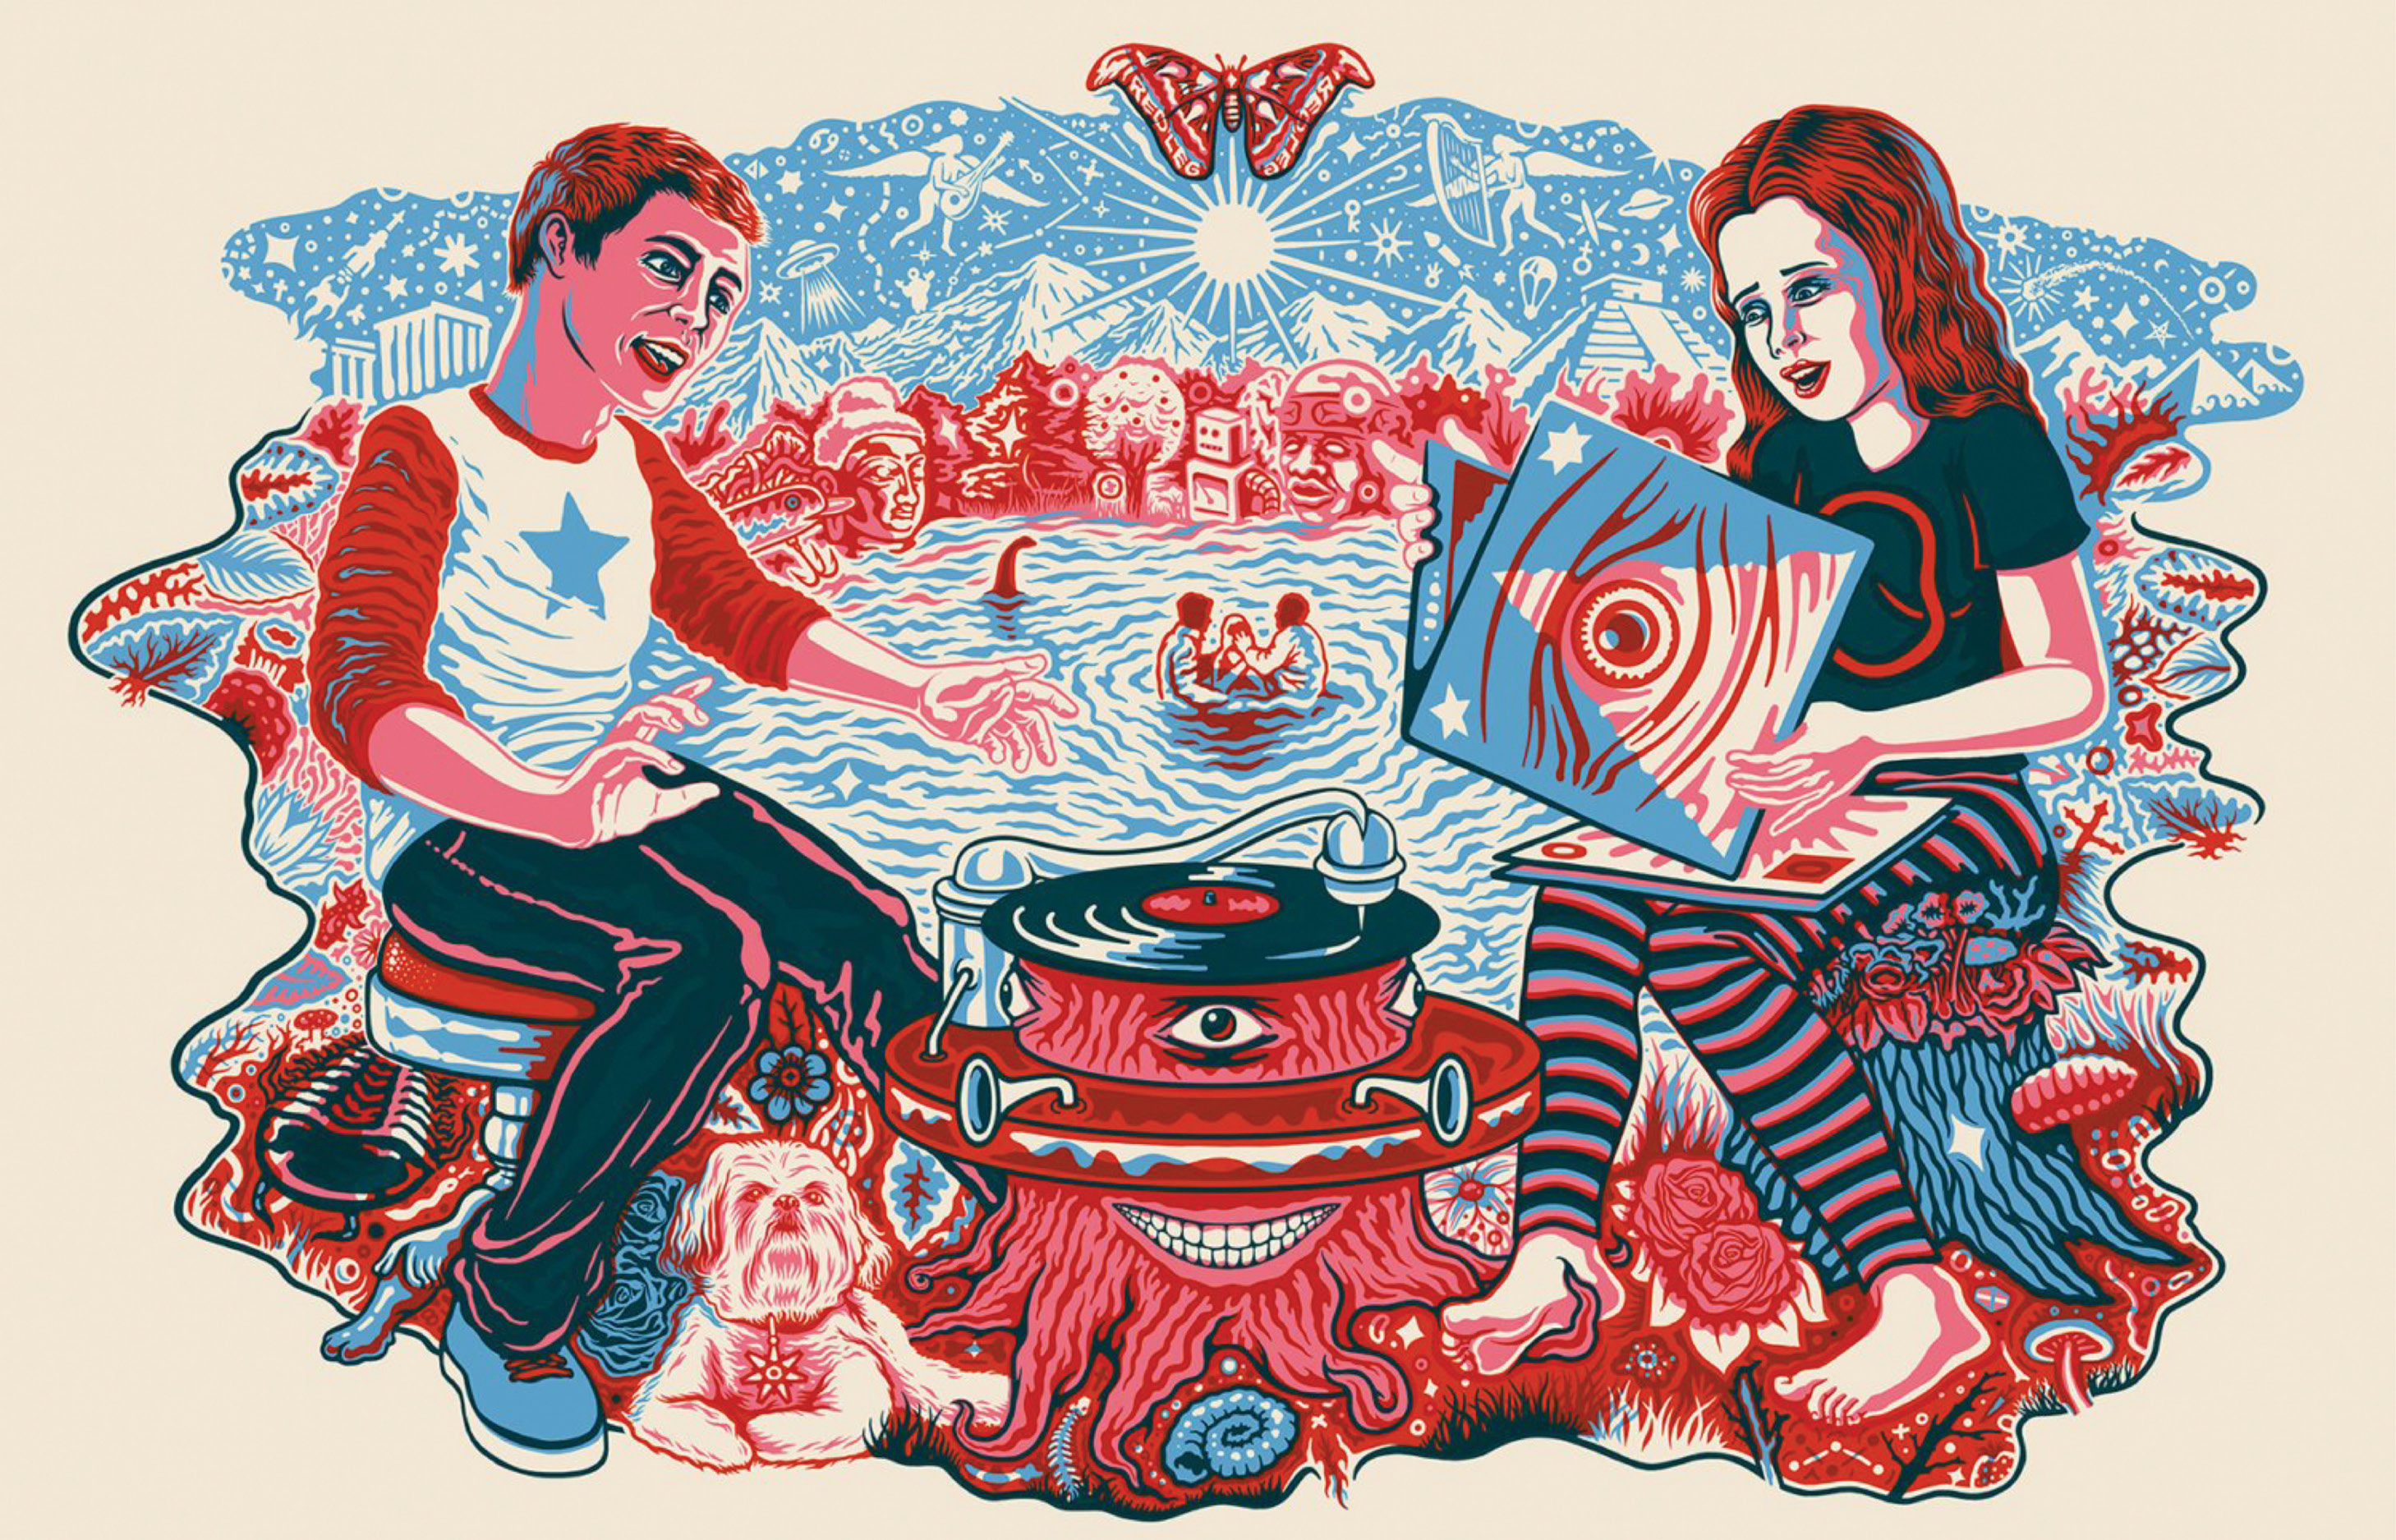 Illustration of two people sitting near a surreal record player.